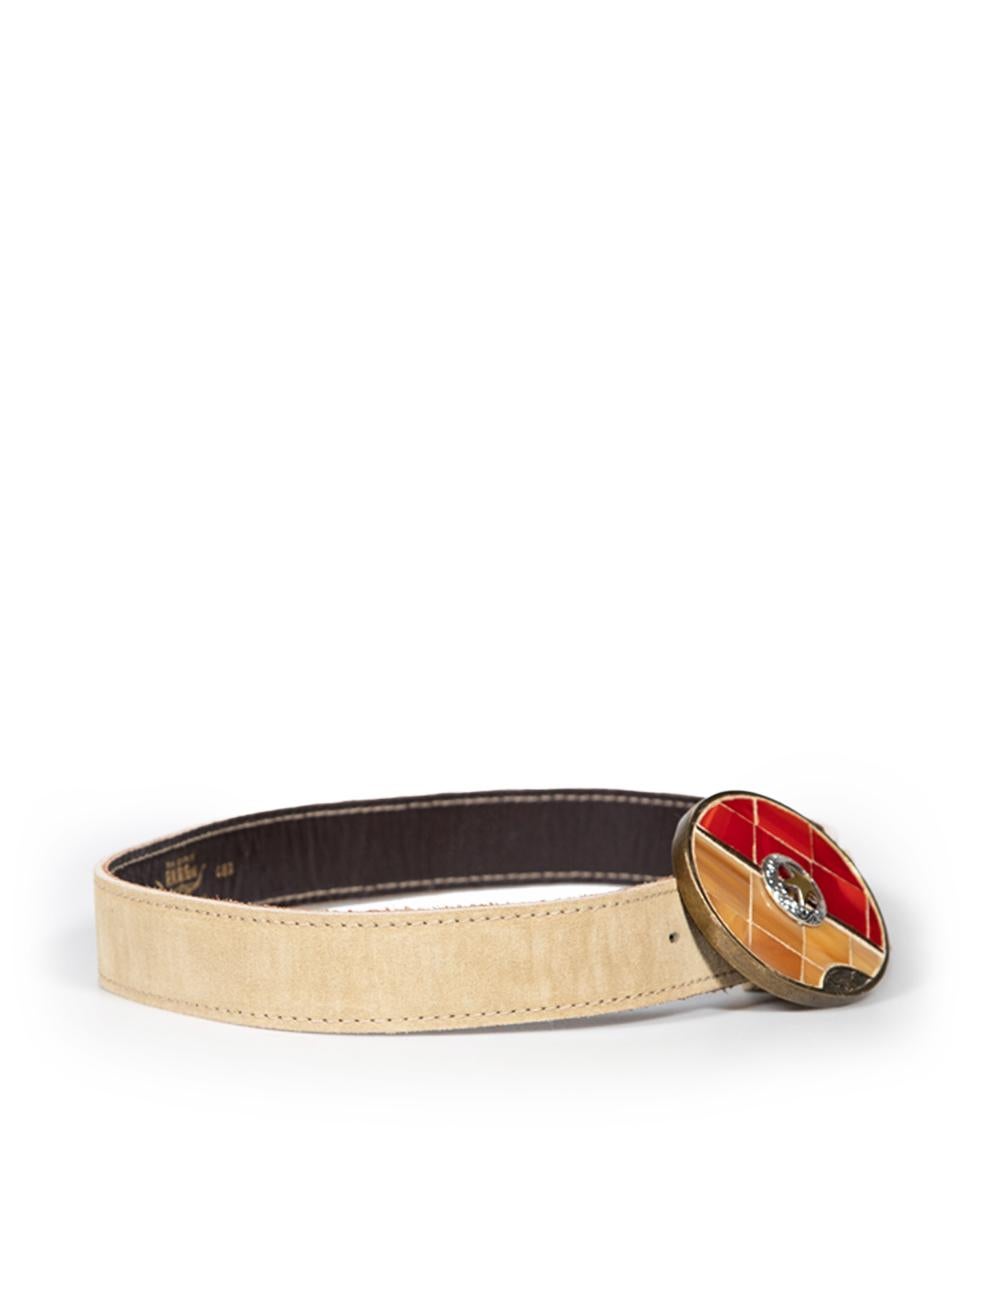 CONDITION is Good. General wear to belt is evident. Moderate signs of wear to the buckle with tarnishing and scratches and discolouration on the suede belt. The buckle holes are warped on this used Brambilla designer resale item. Comes with extra